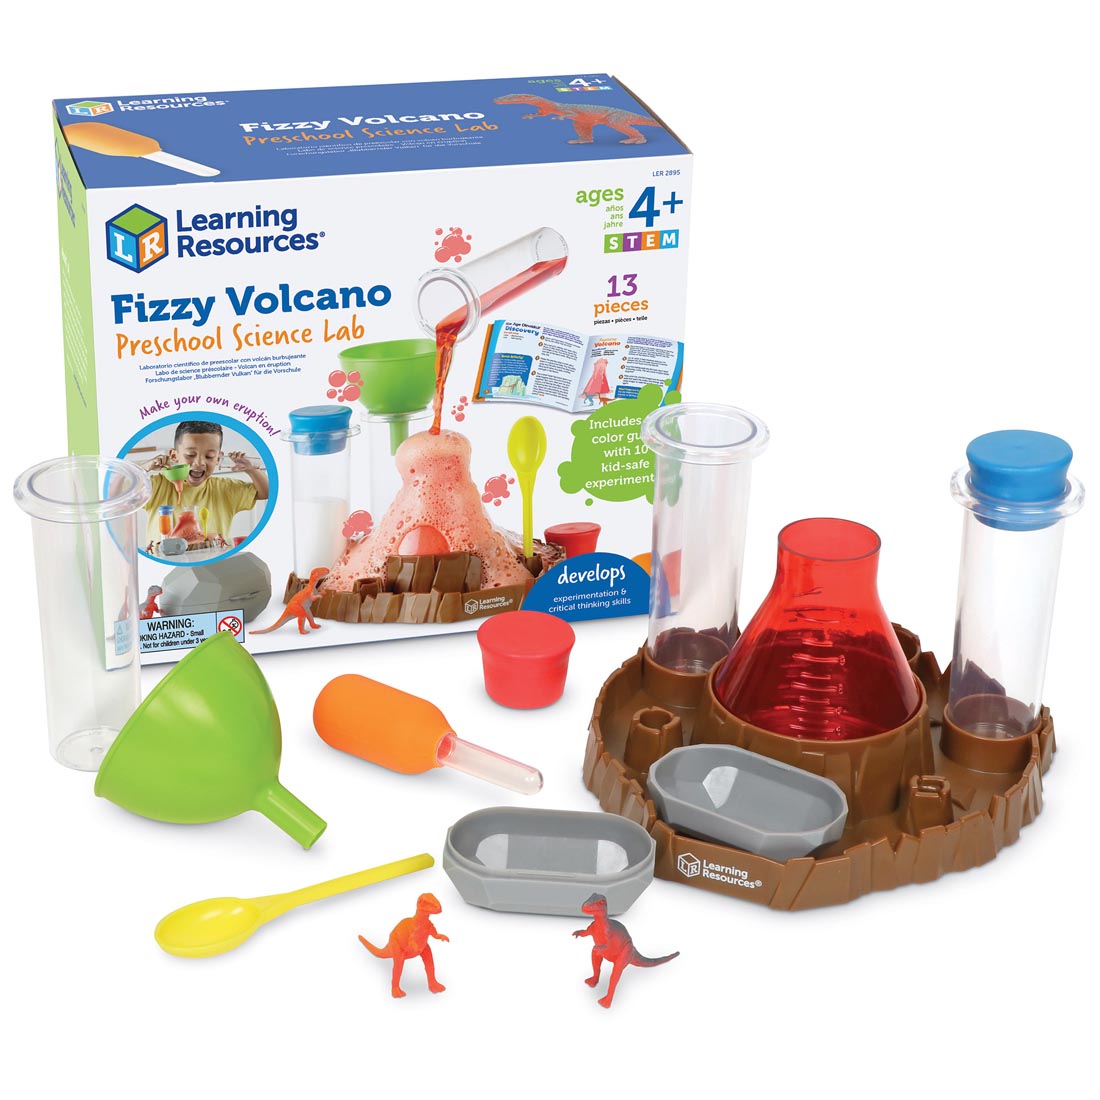 Fizzy Volcano Preschool Science Lab with contents shown outside the packaging